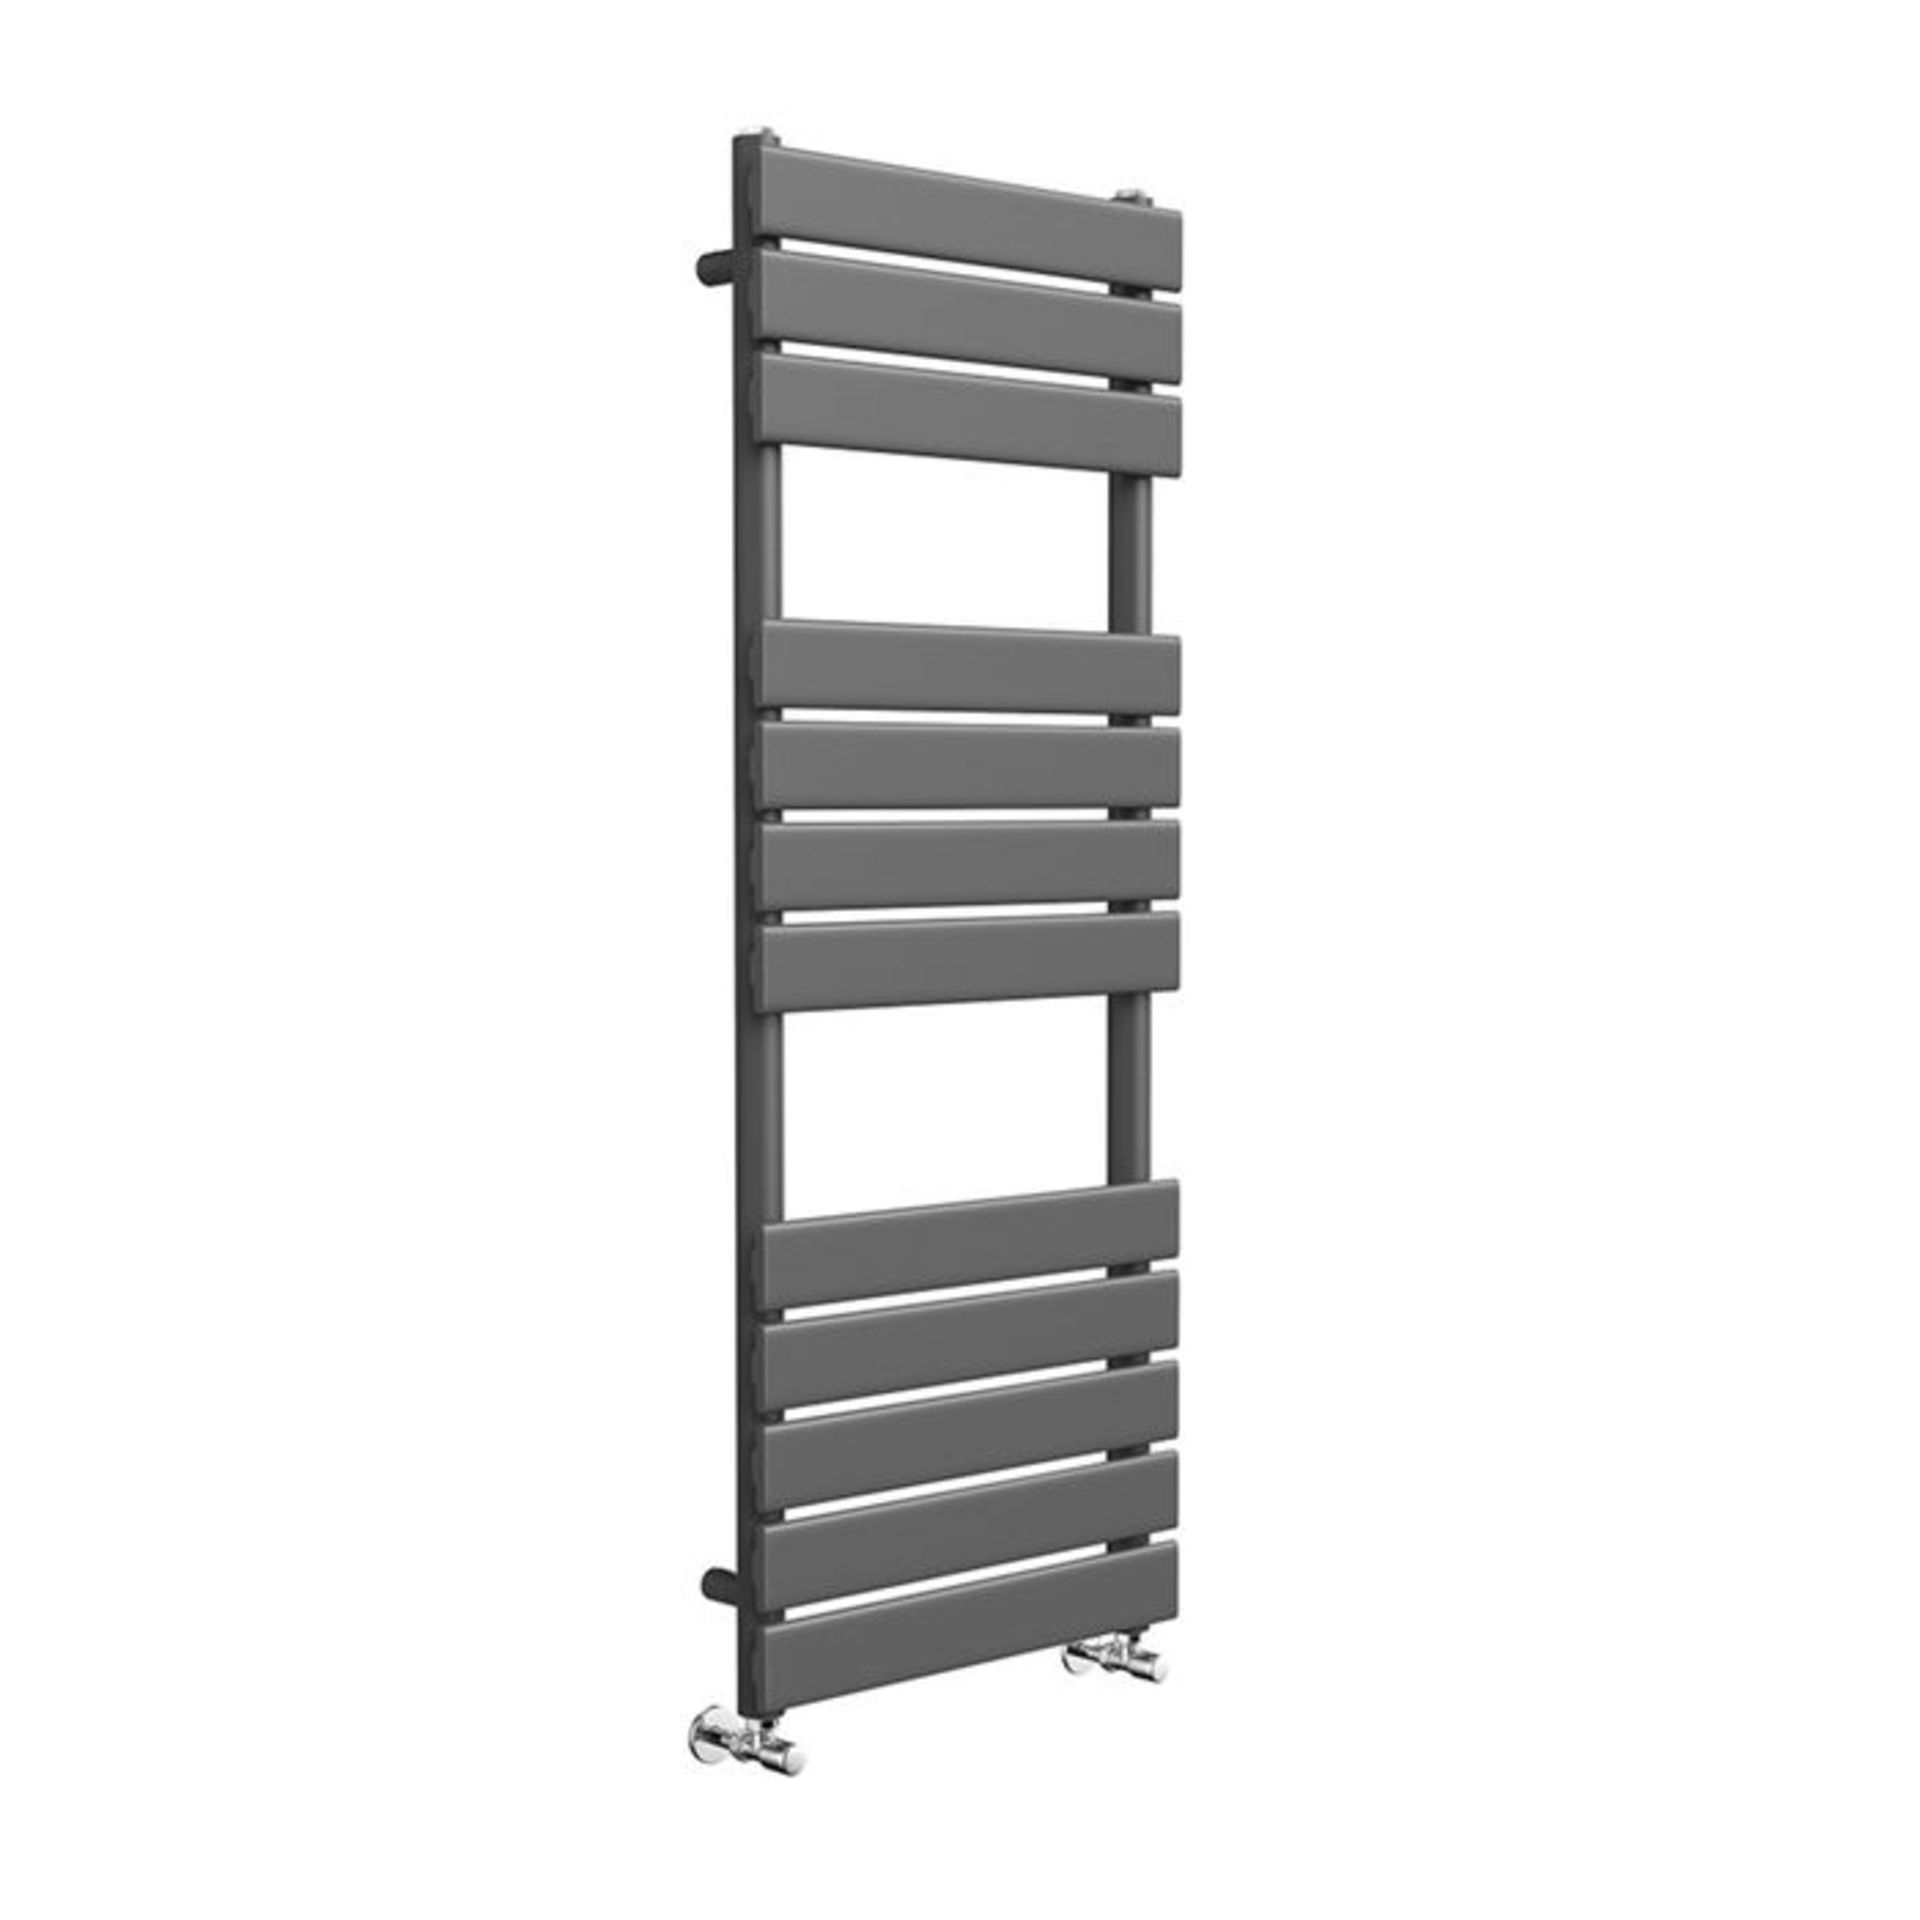 (T137) 1200x450mm Anthracite Flat Panel Ladder Towel Radiator. Made with low carbon steel, - Image 2 of 2